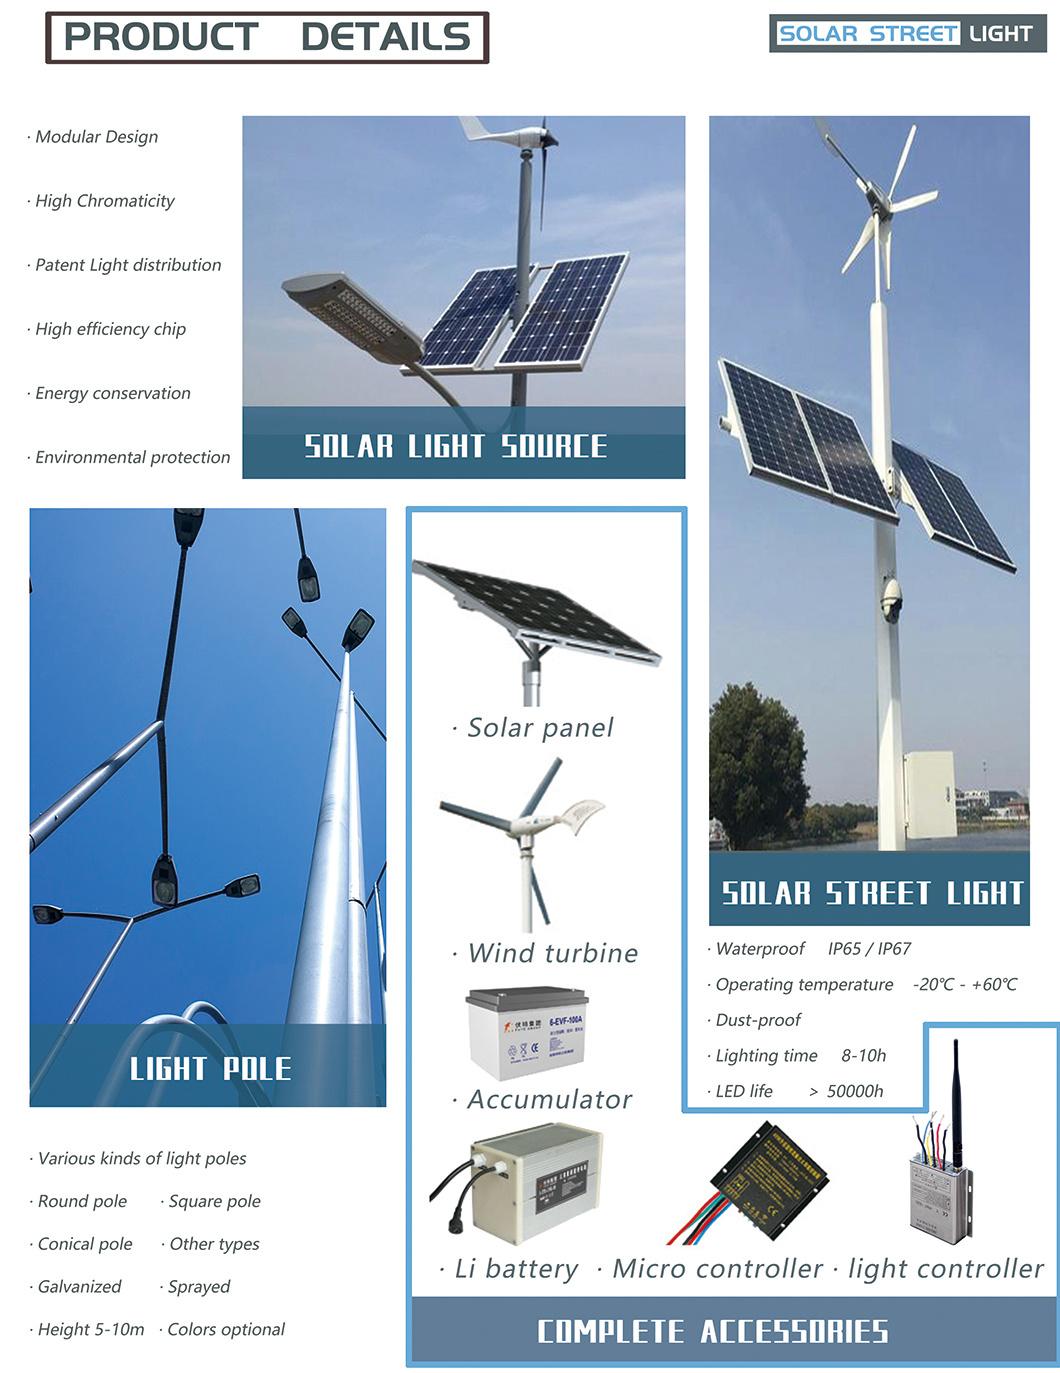 Ala Low Cost Outdoor Industrial IP66 30W 60W 80W All-in-Two Solar Street Light Price with Pole